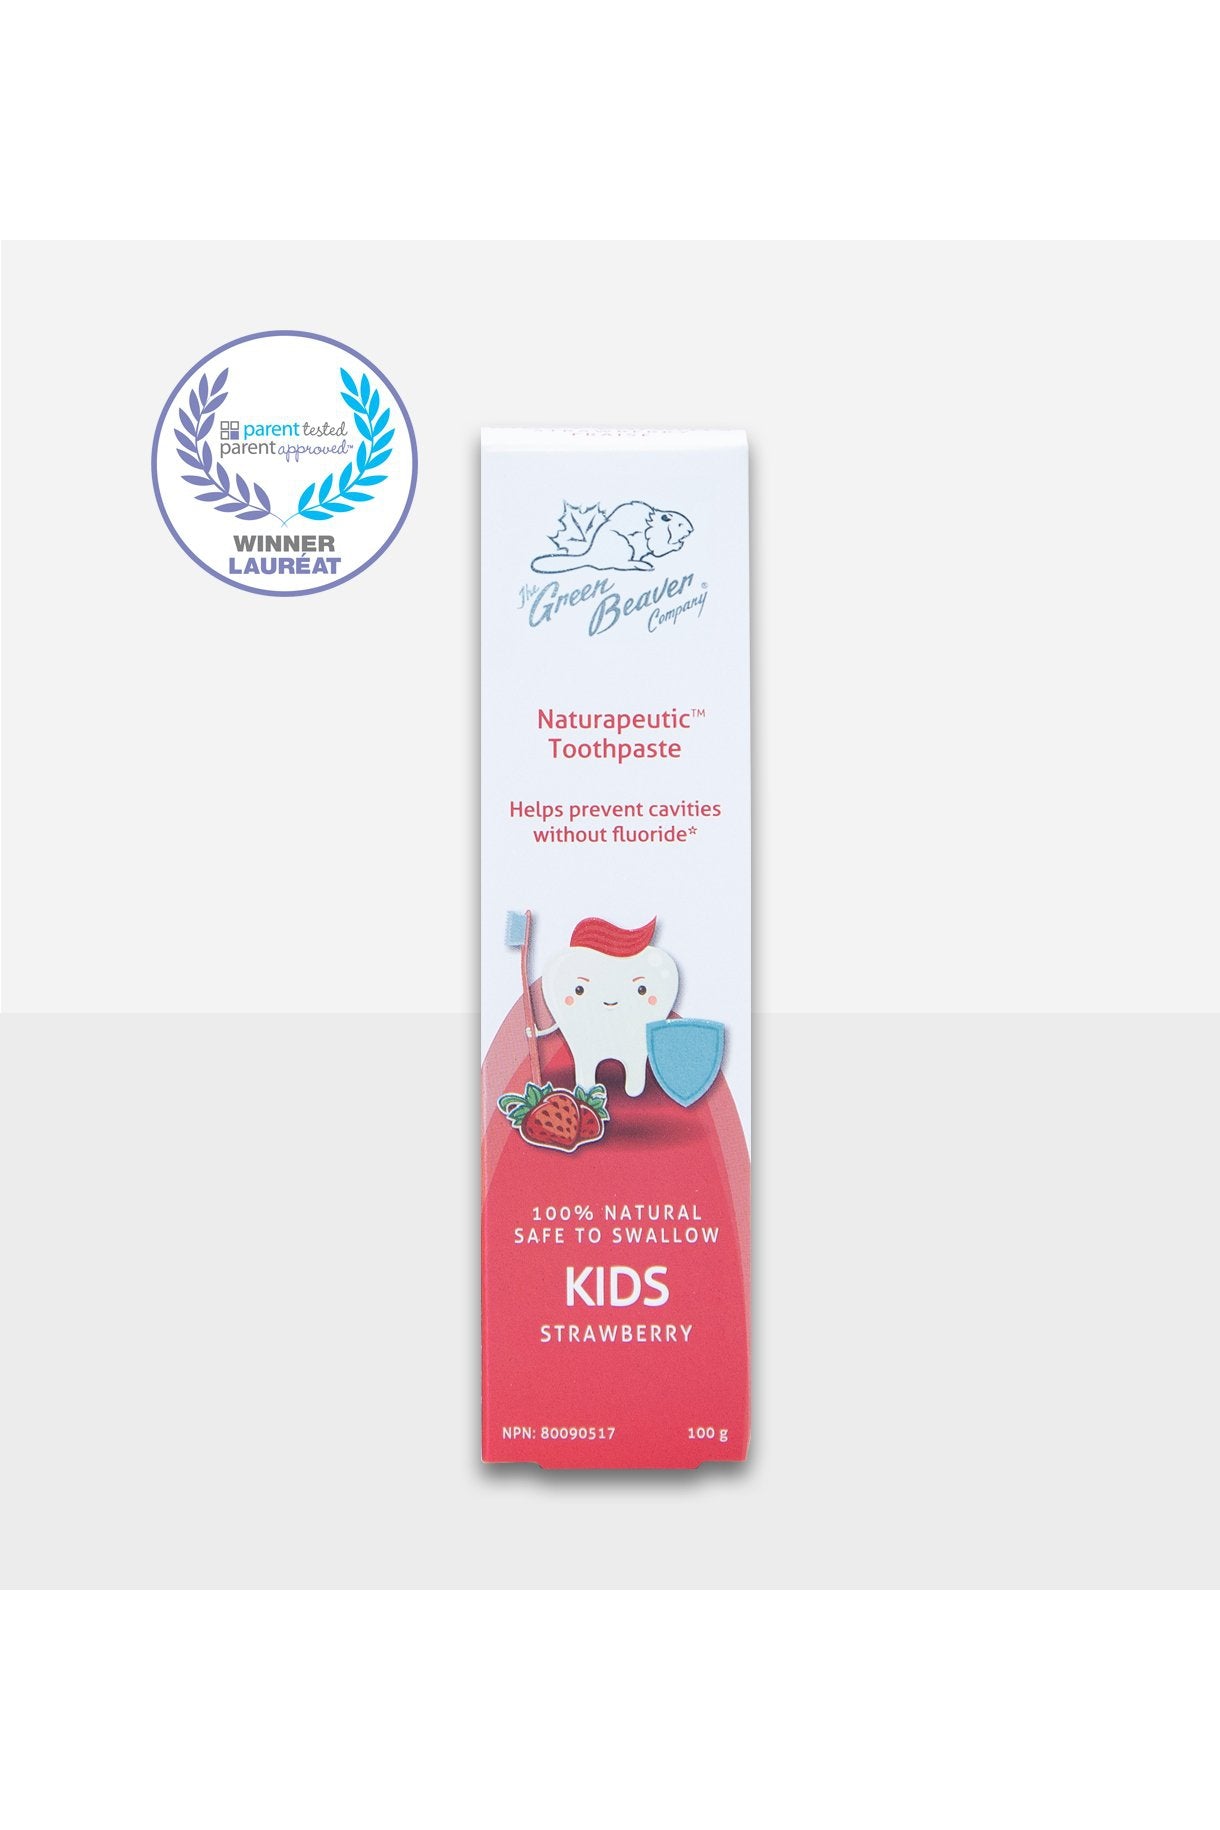 Green Beaver Naturapeutic Kids Toothpaste Strawberry Flavour 100g